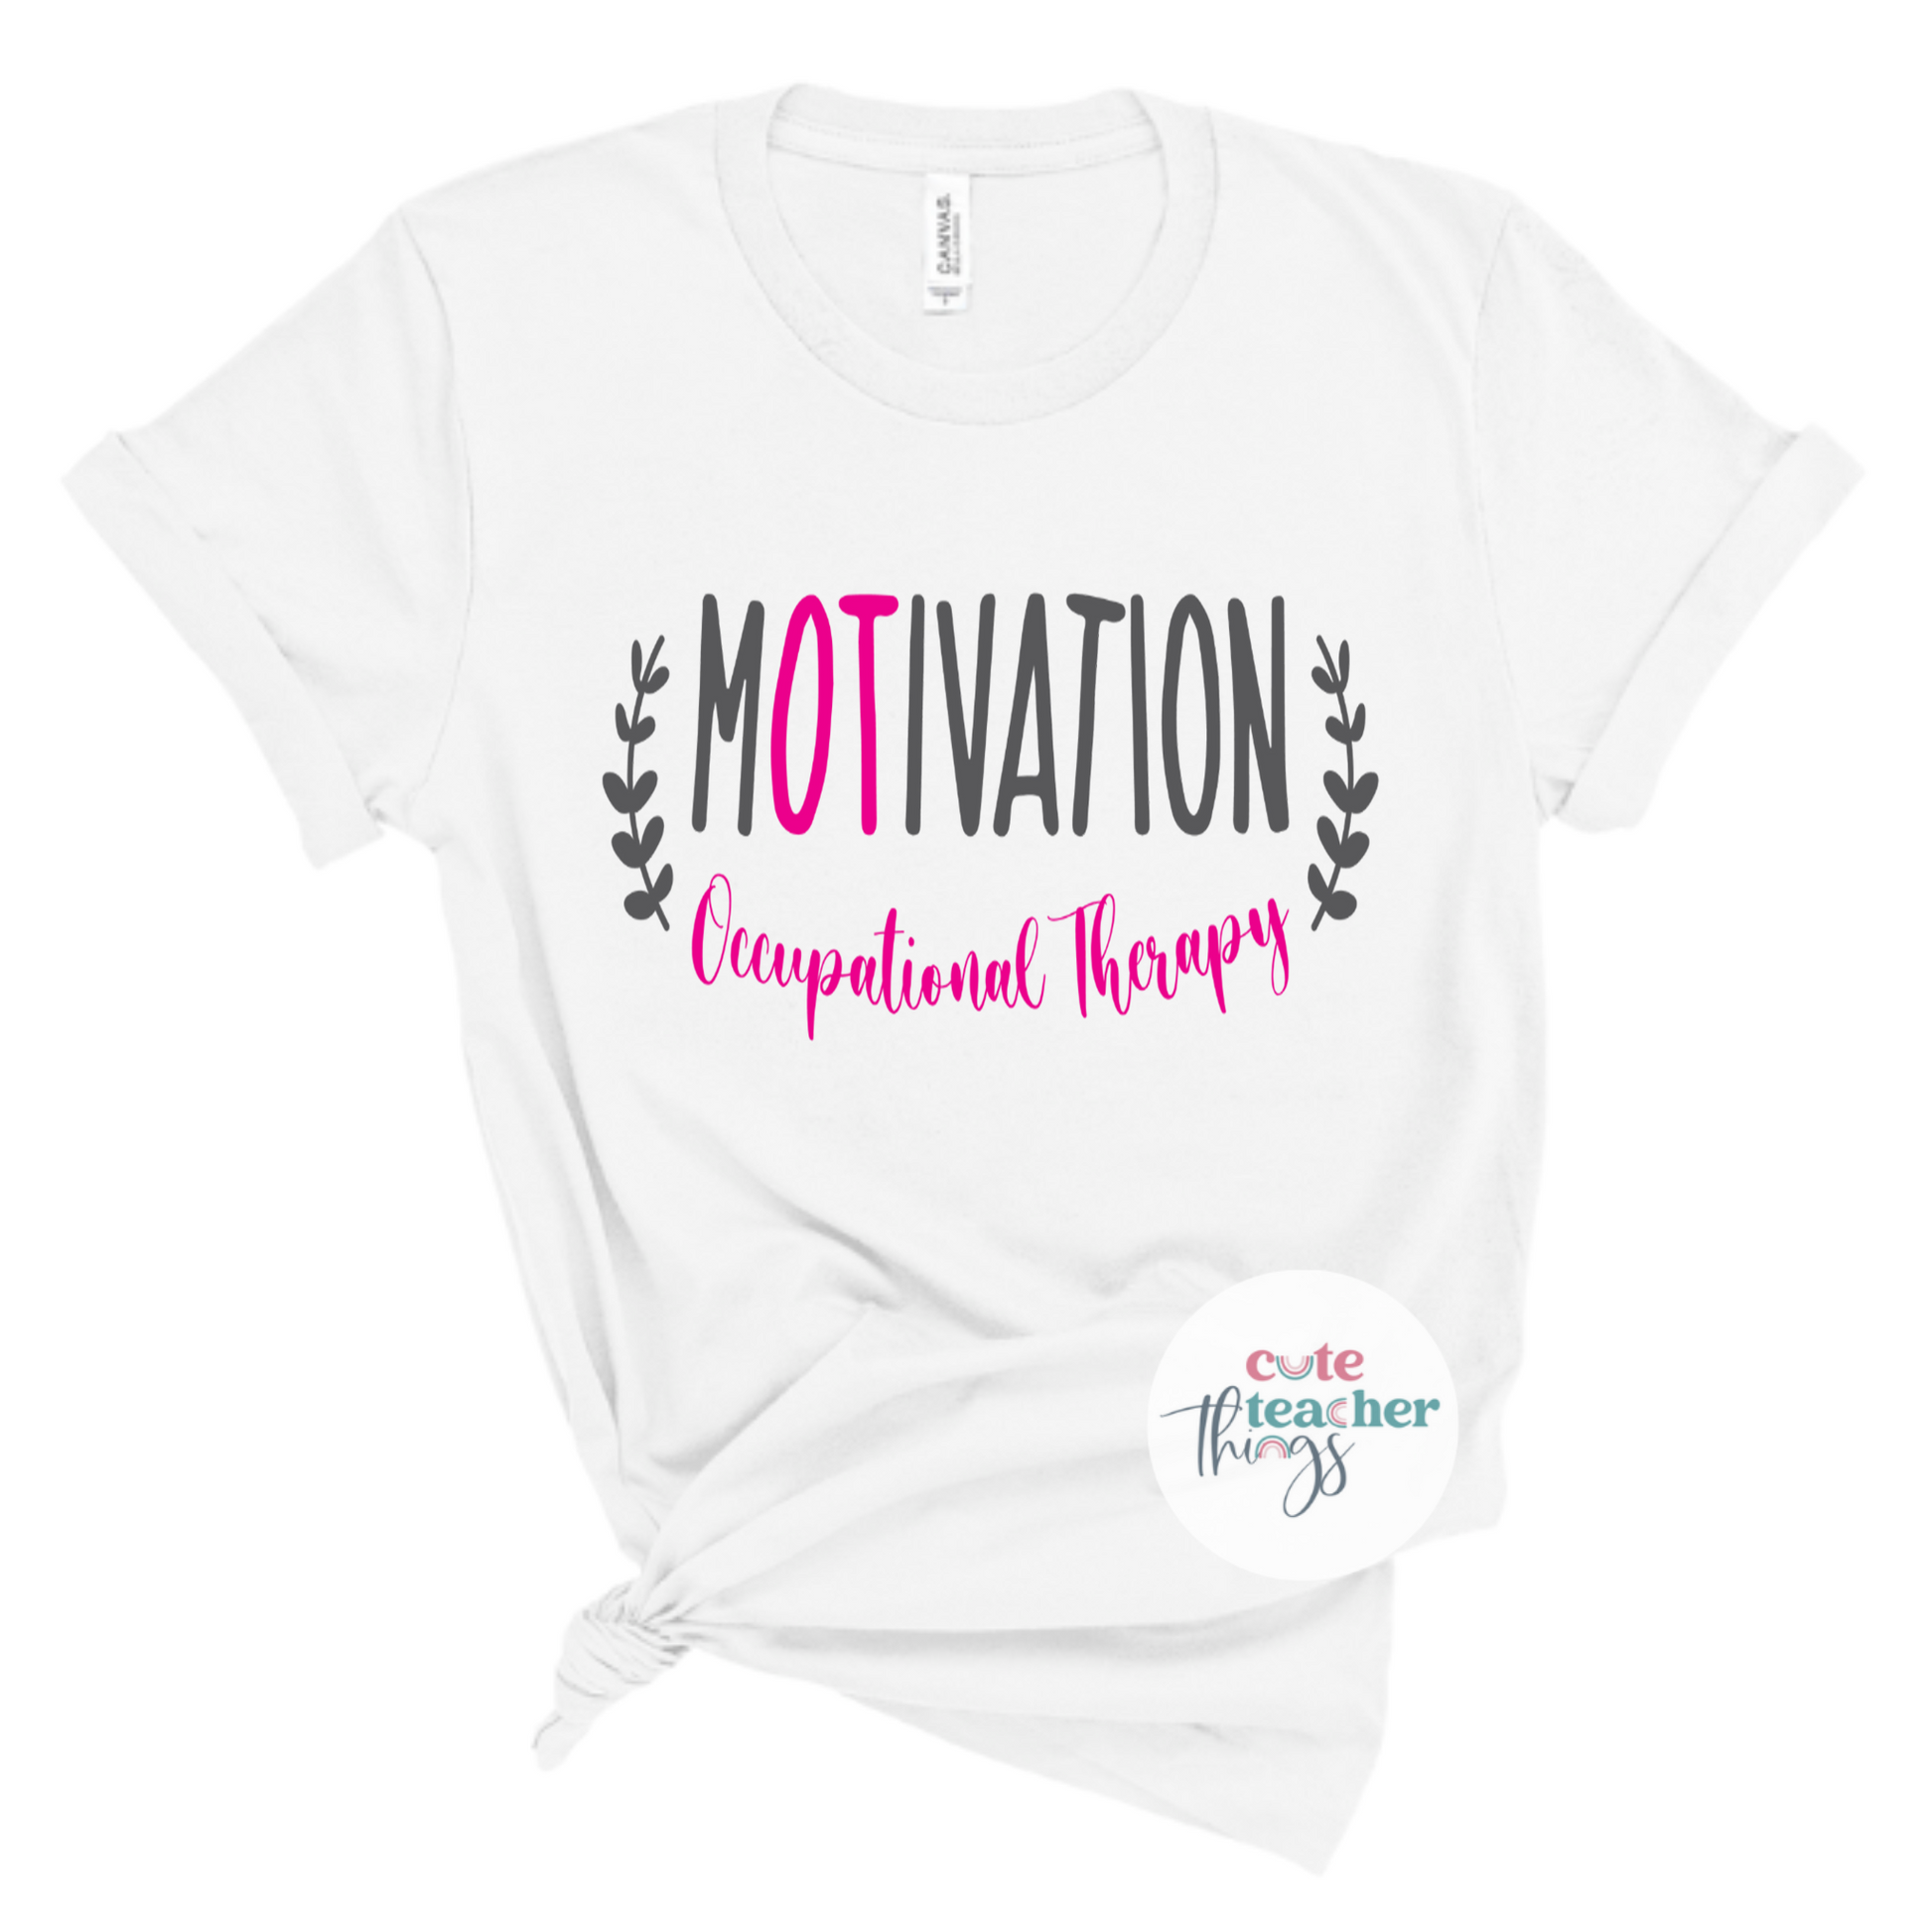 occupational therapy motivation tee, Occupational therapy shirt, gift for OT shirt